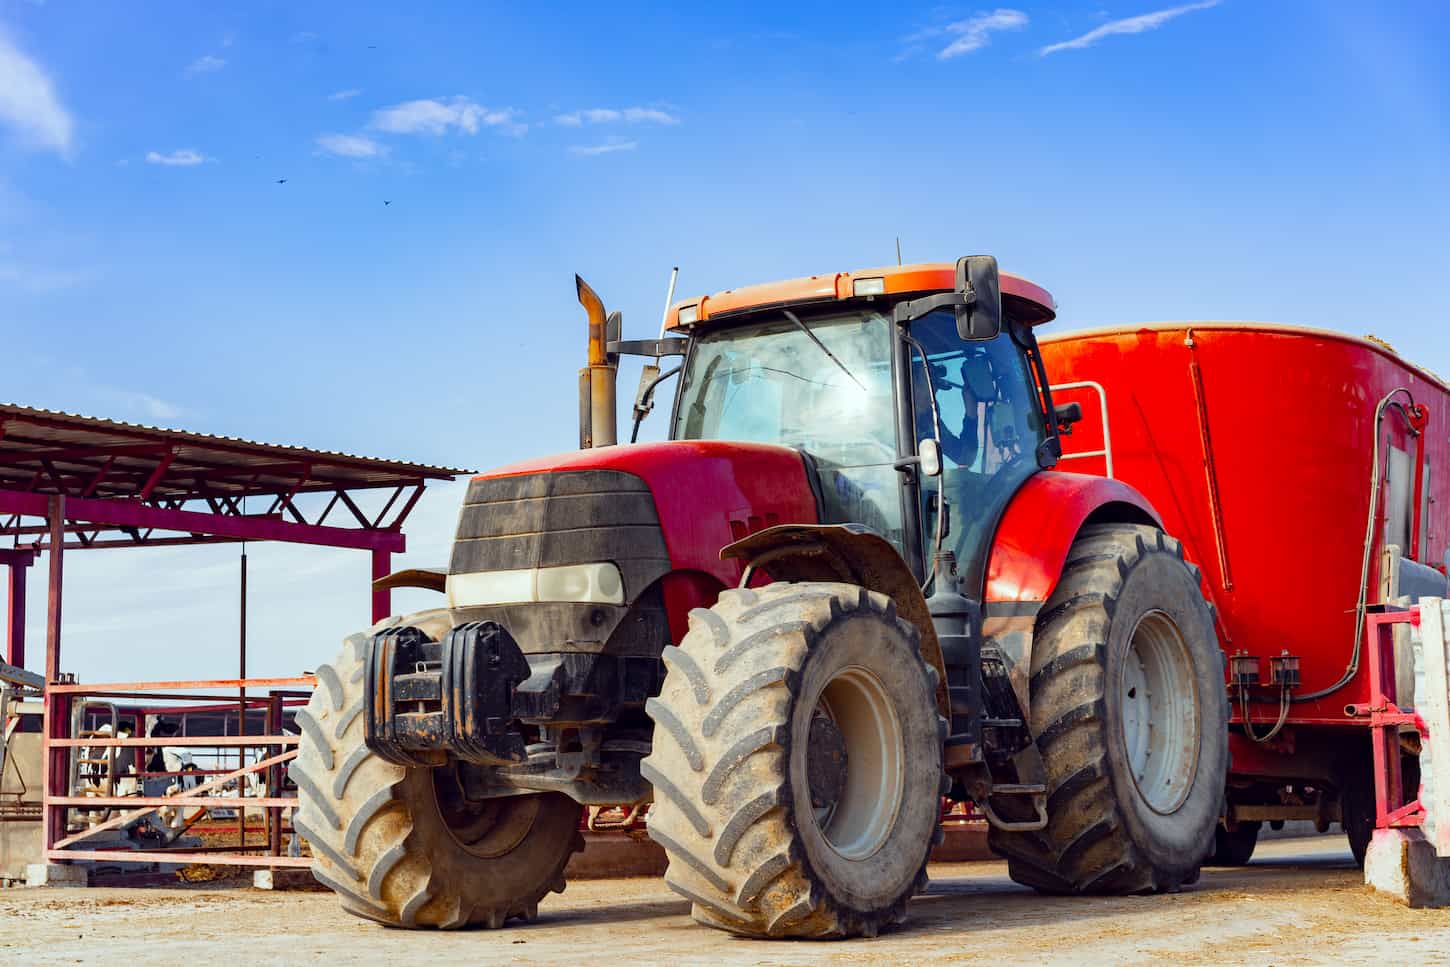 An image of Modern red agricultural tractor in a farm